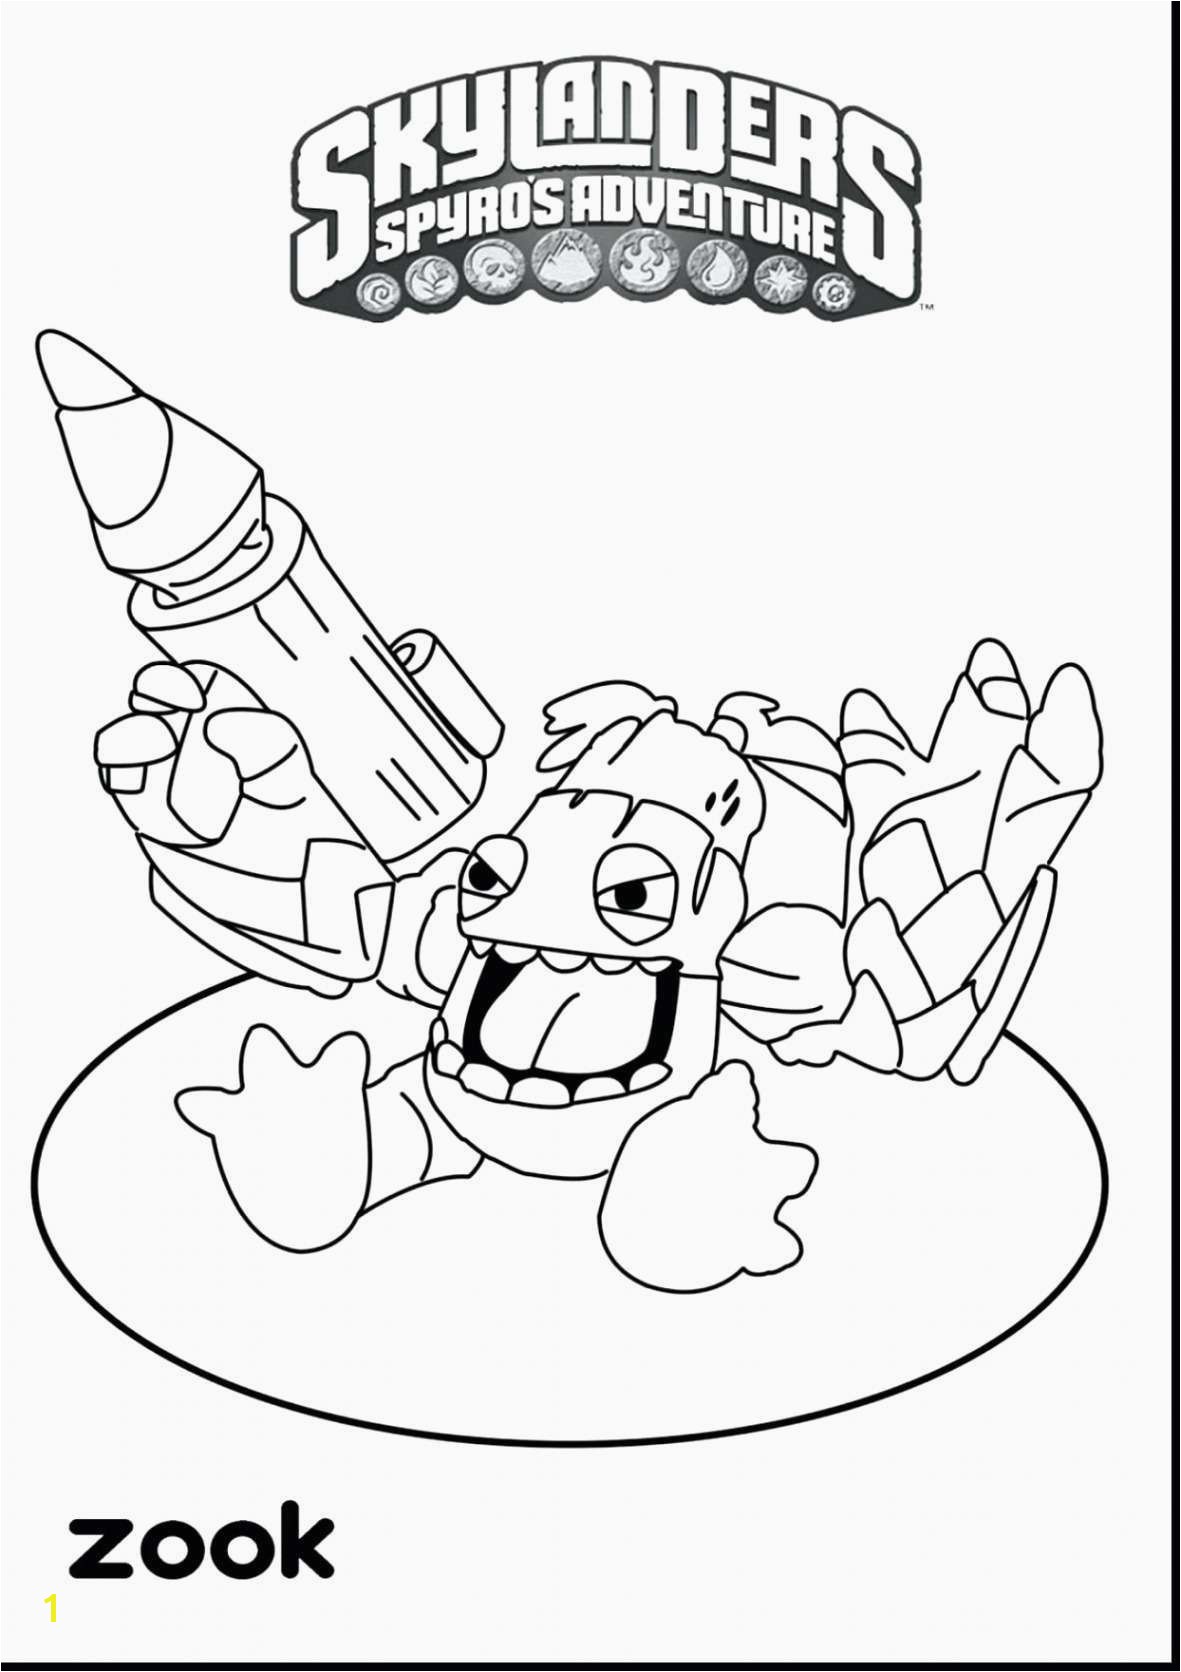 Cool Printable Coloring Pages Fresh Cool Od Dog Coloring Pages Free awesome printable princess